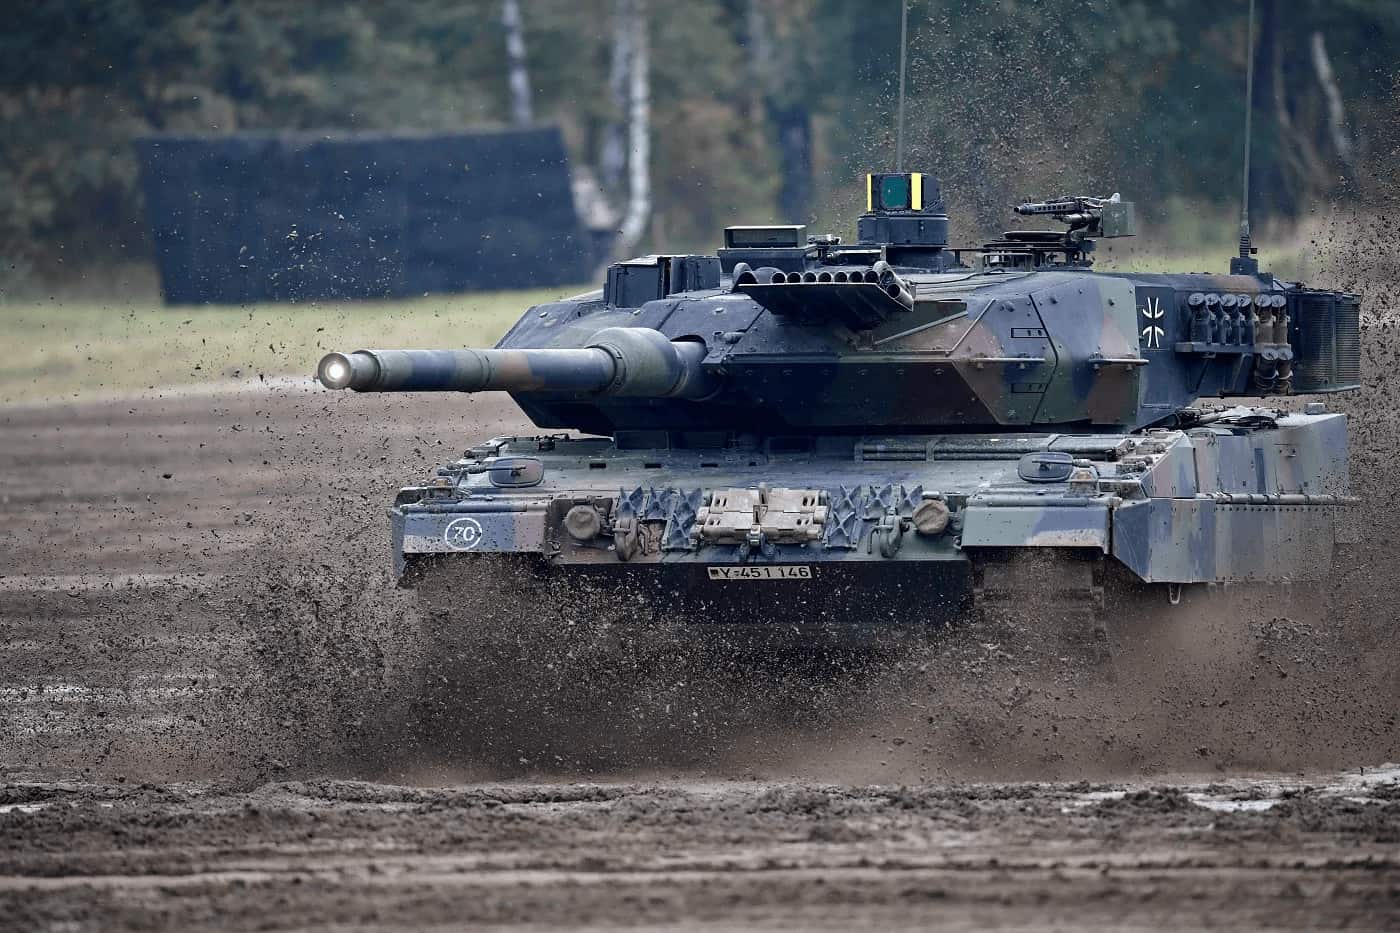 German makers of Leopard 2 tank in legal wrangle over rights